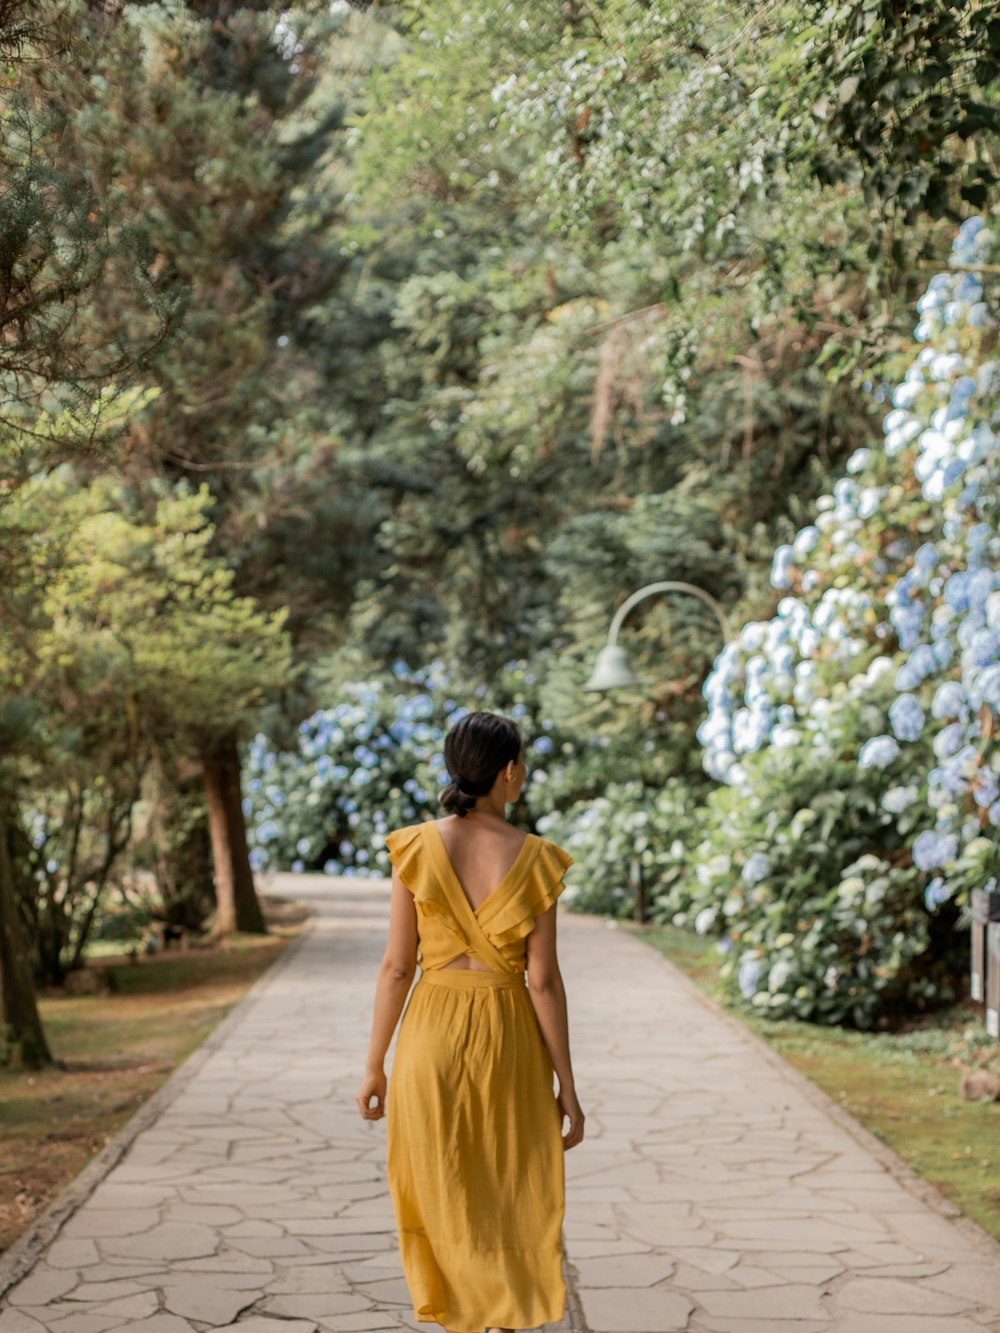 a person in a yellow dress walking on a path with trees on either side of the